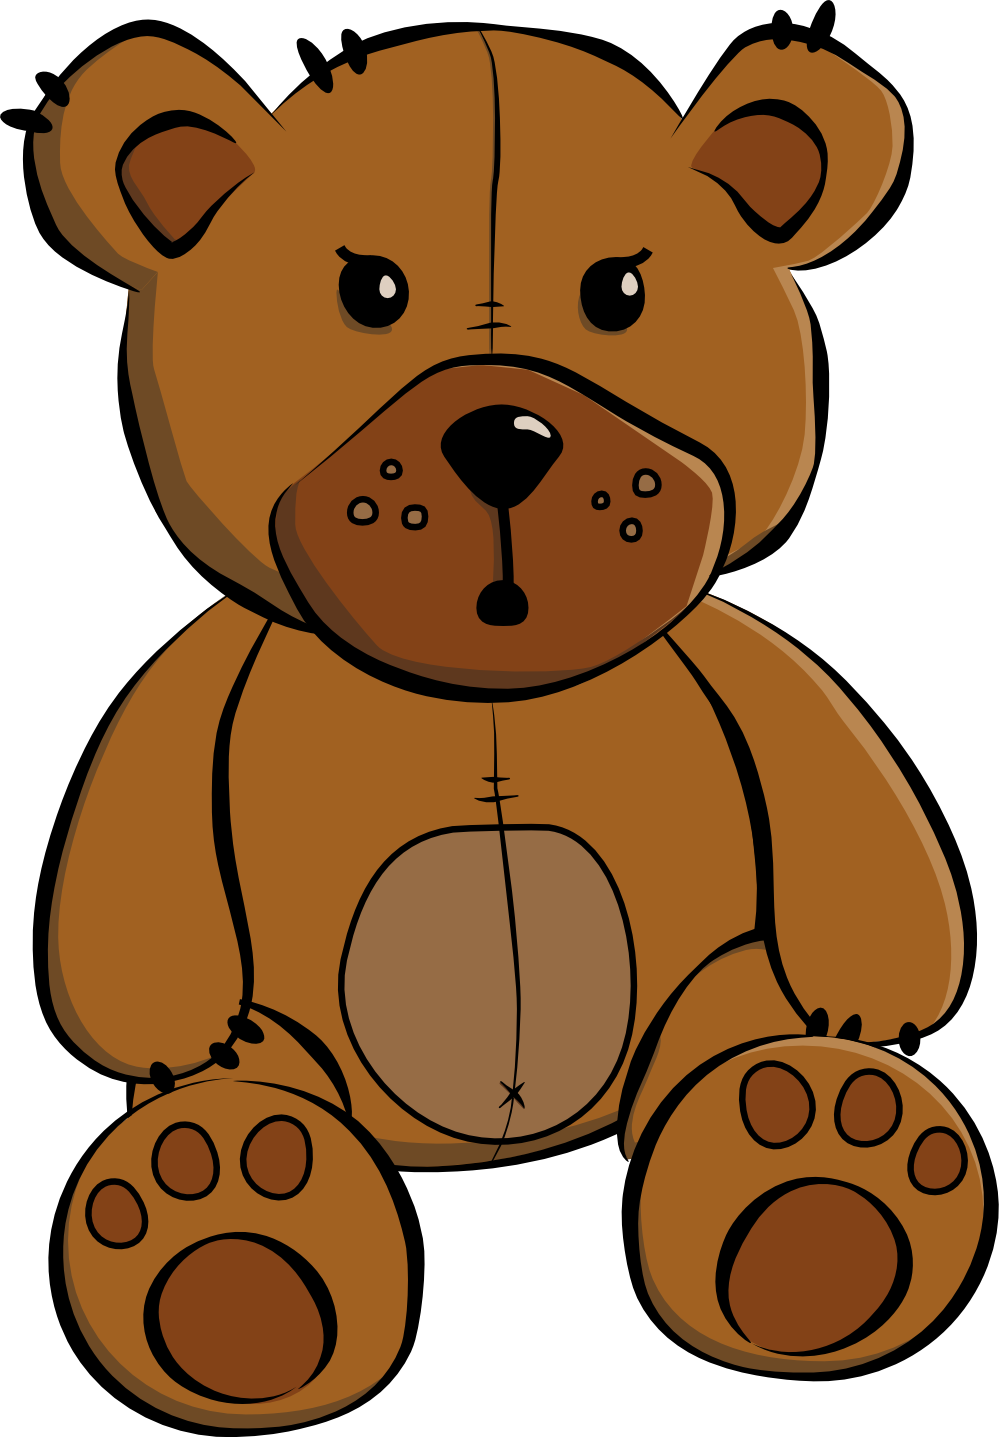 Teddy bear clipart free clipart images 2